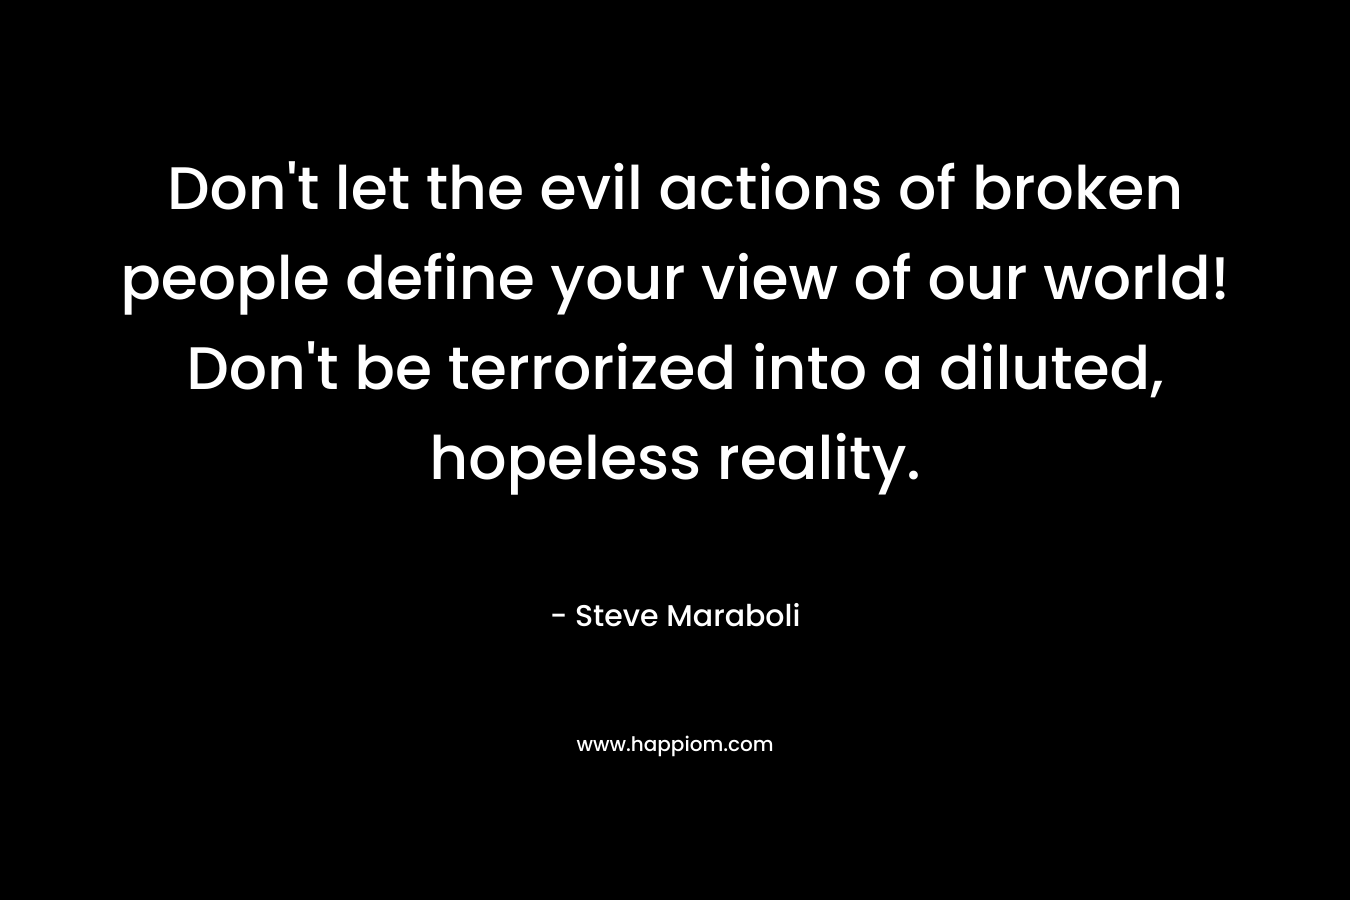 Don't let the evil actions of broken people define your view of our world! Don't be terrorized into a diluted, hopeless reality.